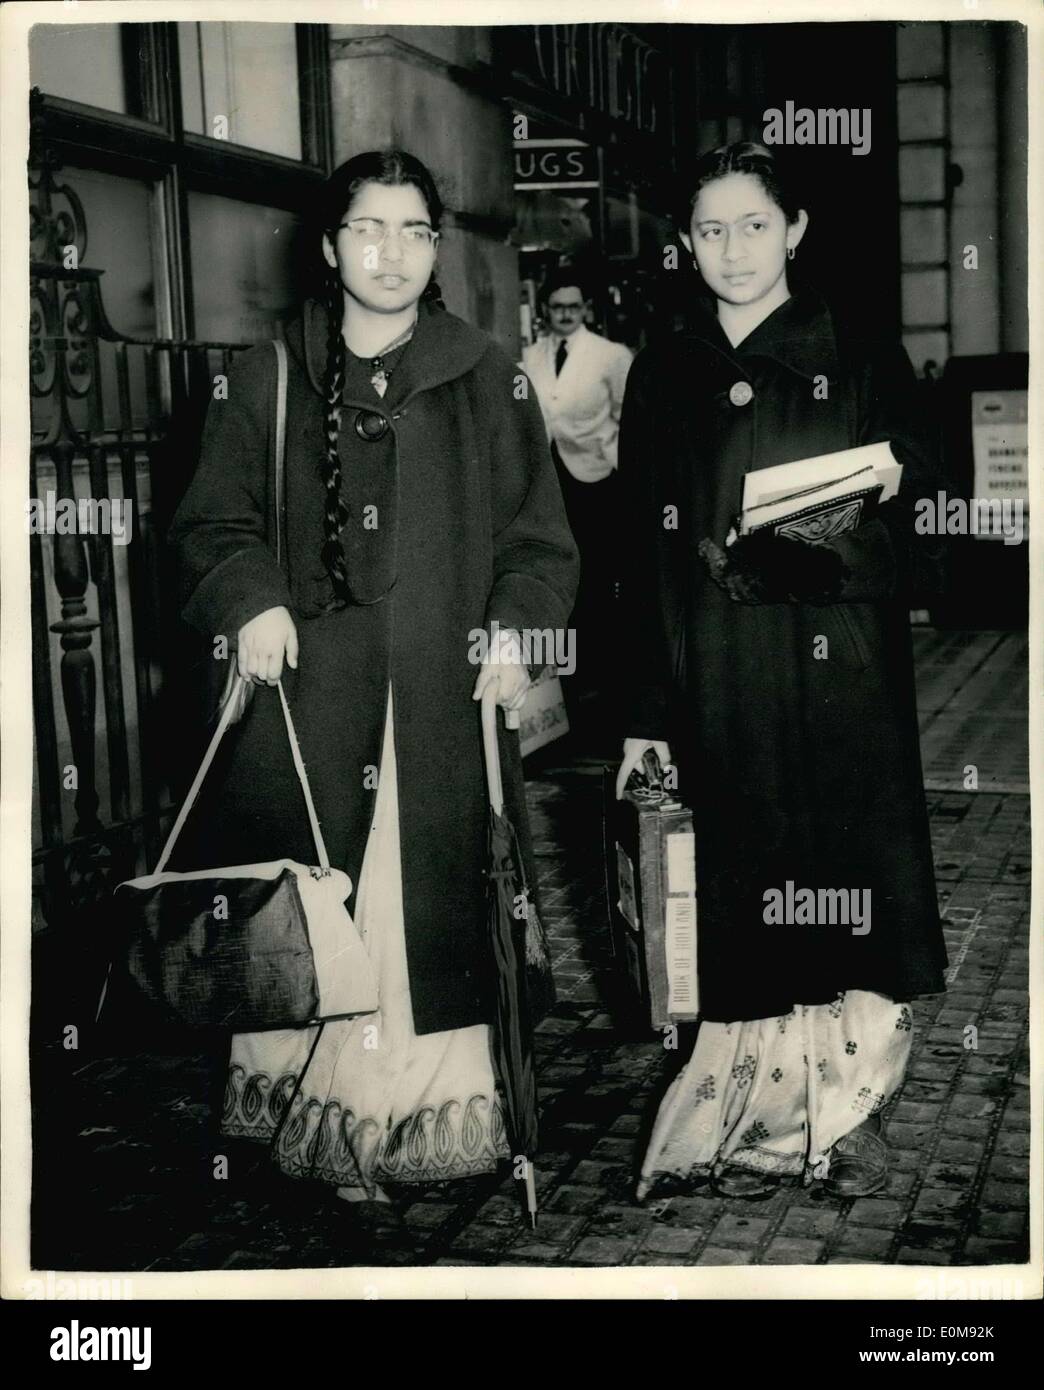 Feb. 11, 1954 - Suspended Girton Girl Students Arrive In London. The Indian girl students from Girton College, who were ''rusticated'' for four days were worried yesterday - about what their relatives in India will say. Anita Chakravarty said as she caught a train for London ''We don't want our people in India to hear about this. a suspension of this kind is viewed with greater gravity in India''. Miss Chakravarty and Miss Ranjana Ray were with four other students when two men undergraduates knocked on the window of a ground-floor room in the women's college after midnight Stock Photo